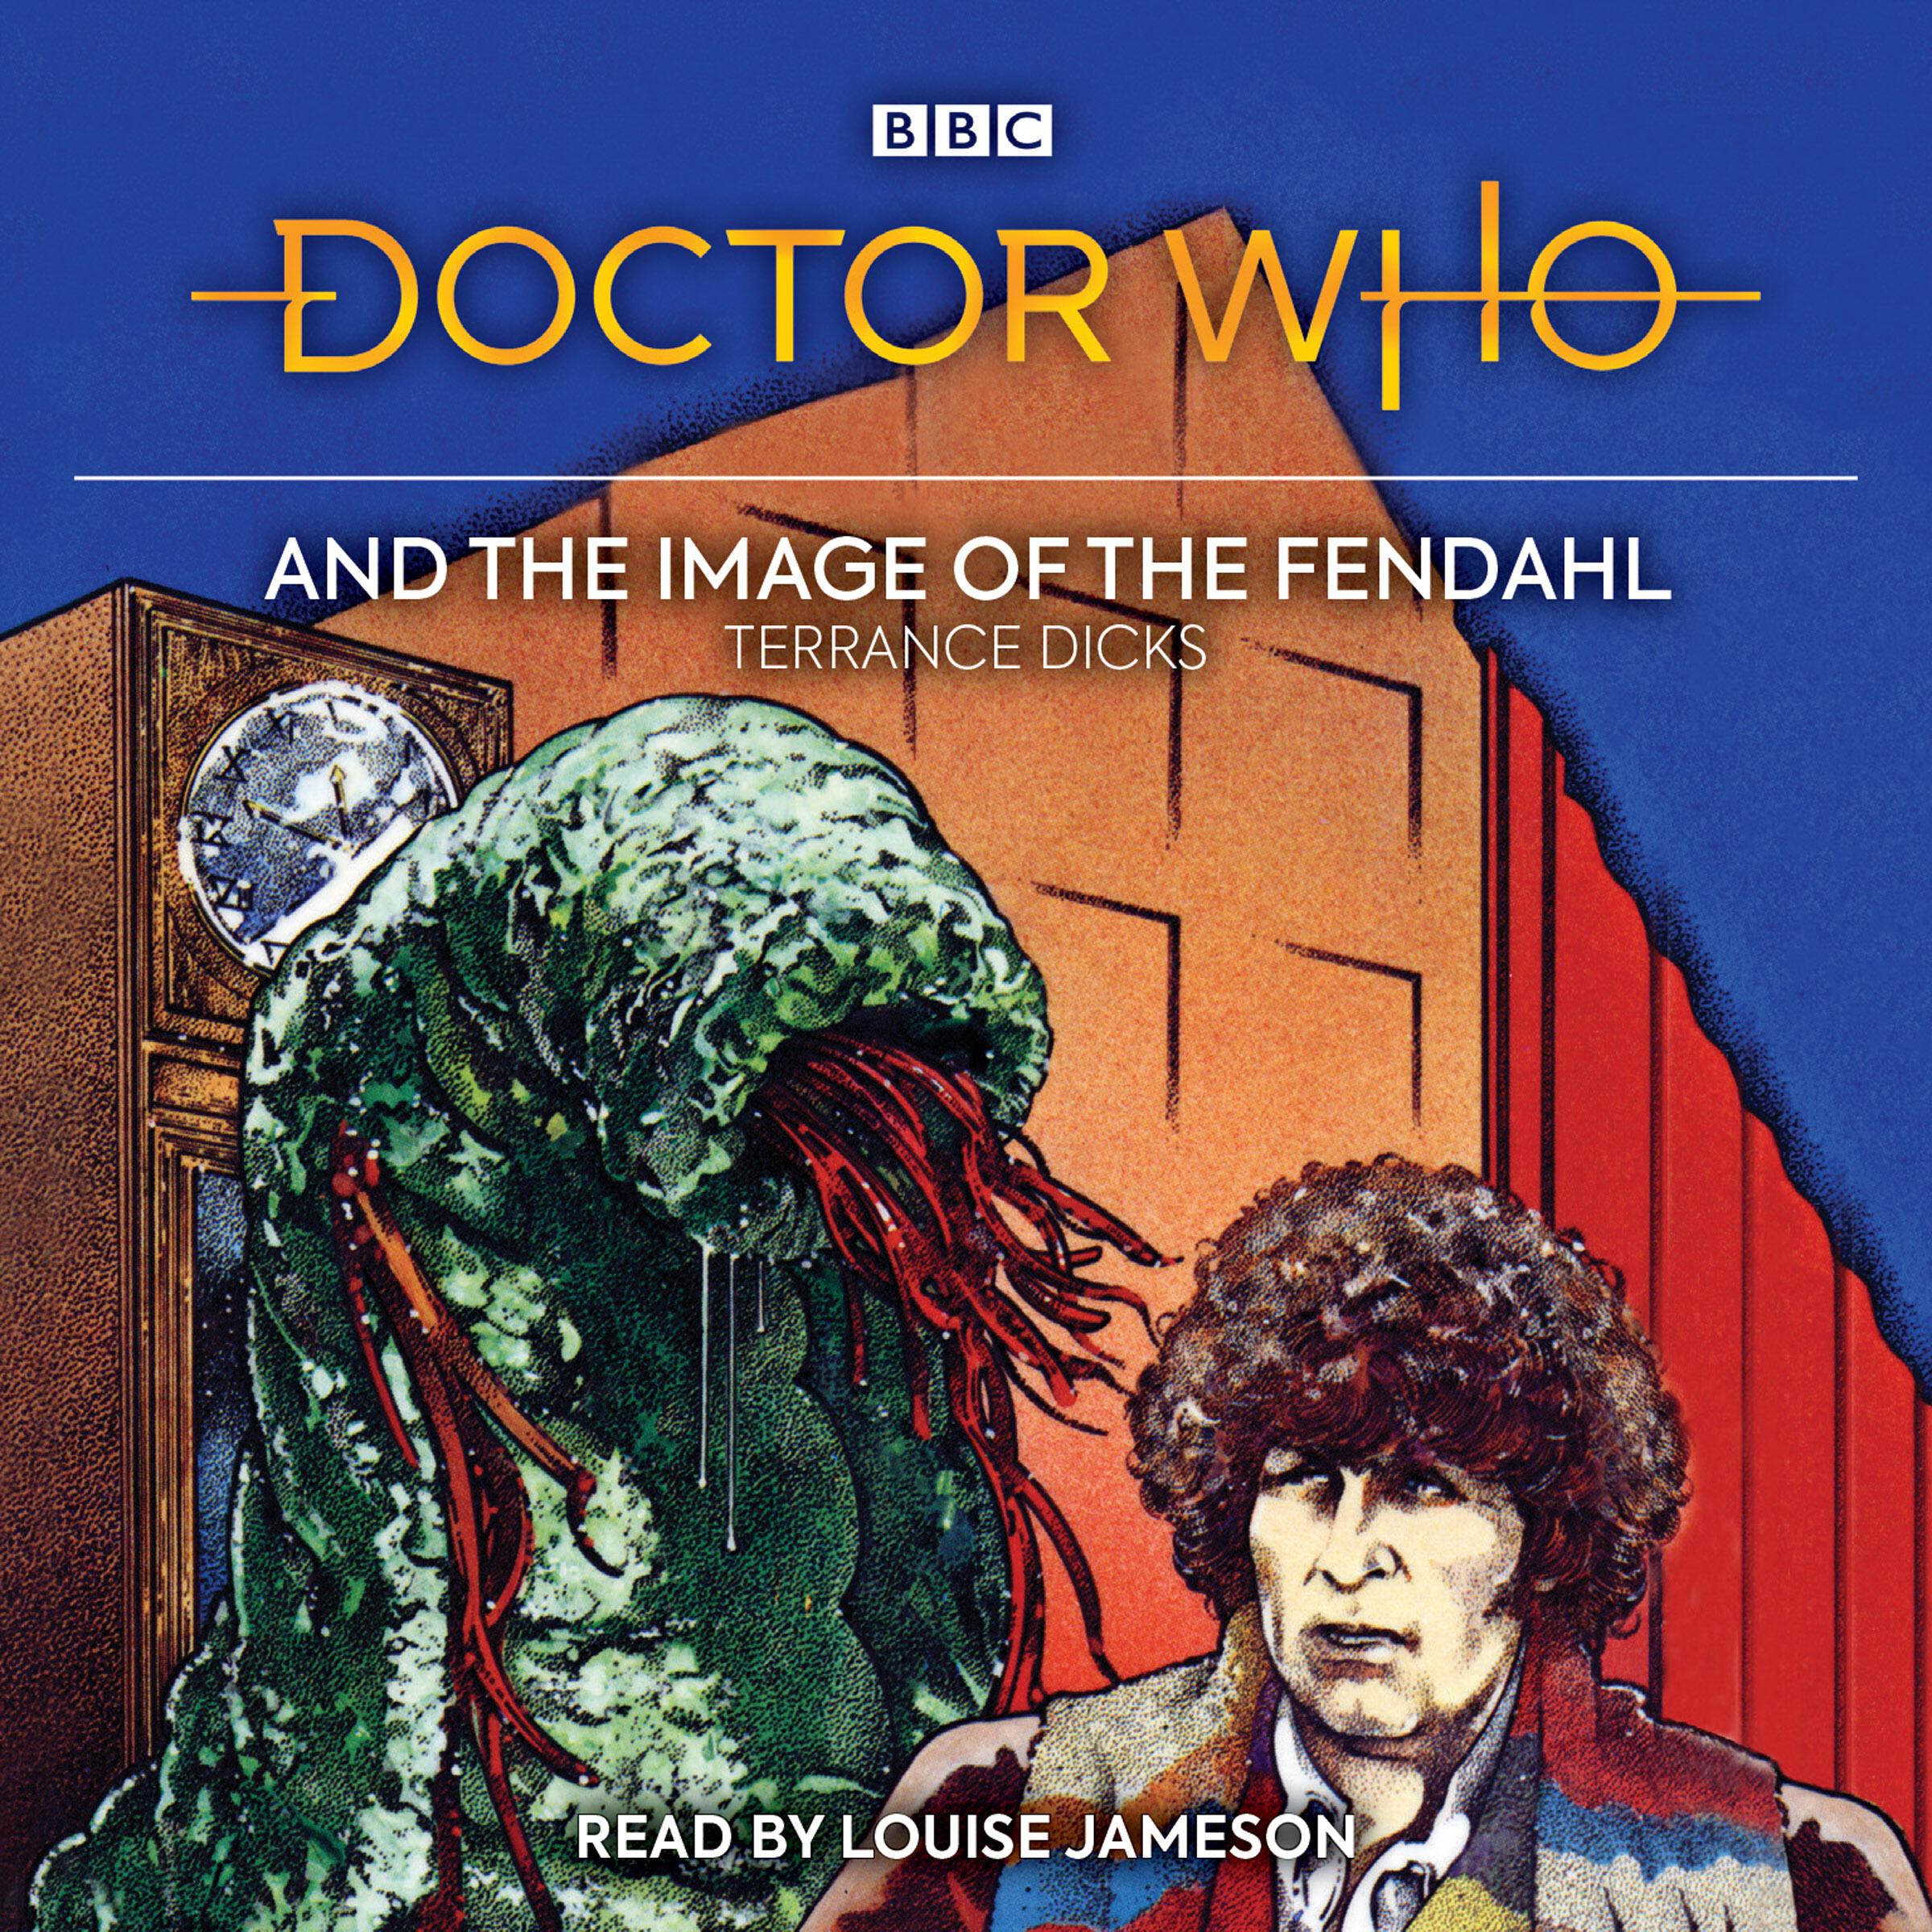 Doctor Who and the Image of the Fendahl - Terrance Dicks